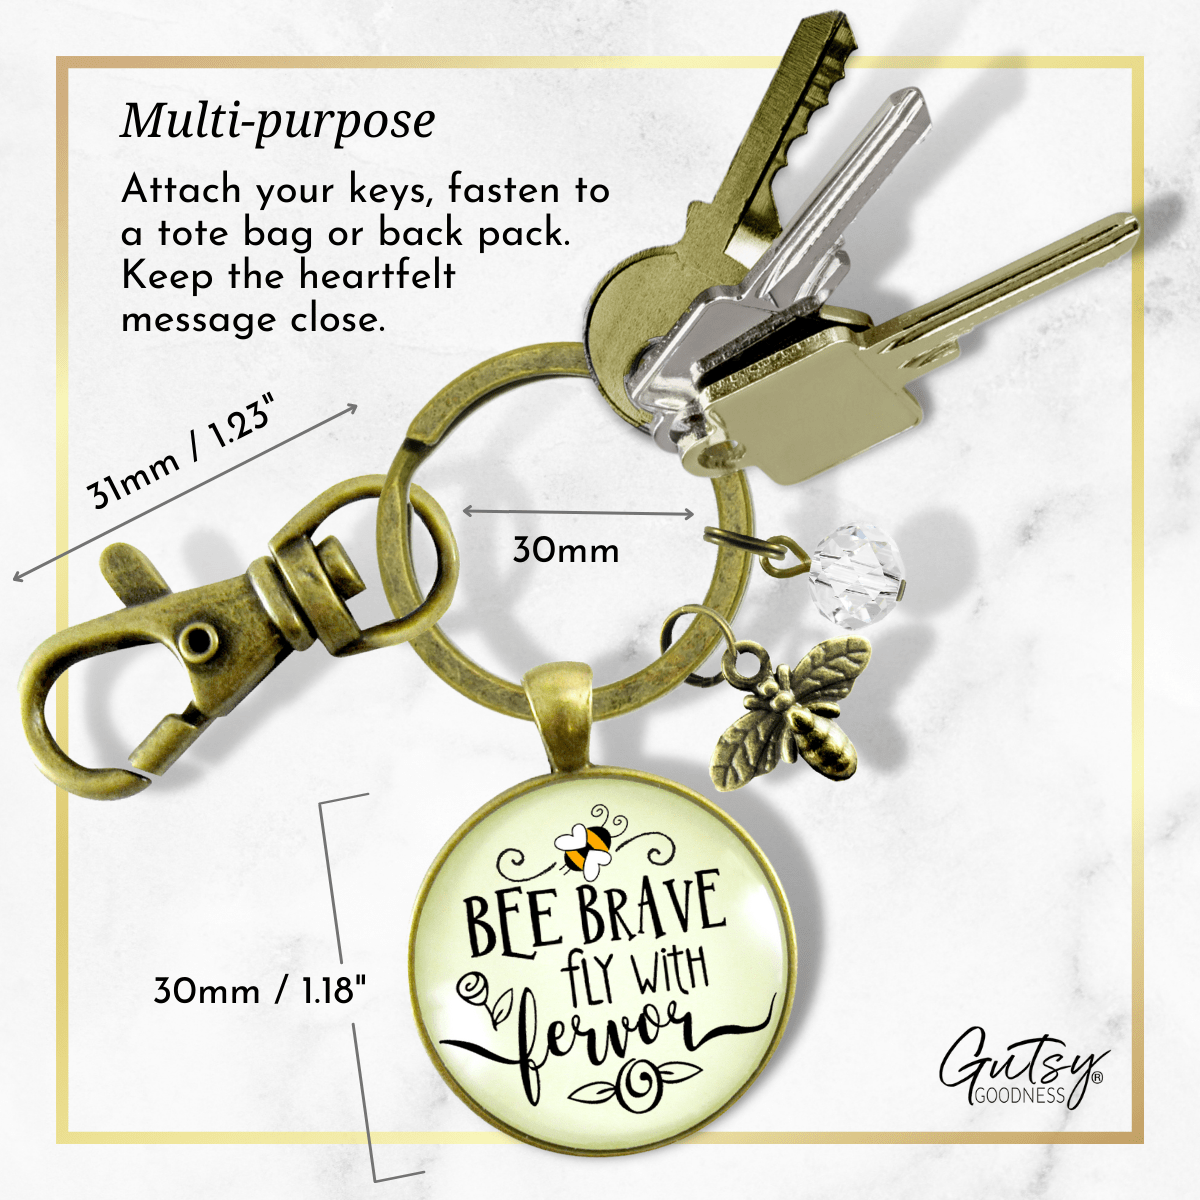 Bee Brave Keychain Fly With Fervor Fun Jewelry For Women Dainty Bumble Bee Quote - Gutsy Goodness